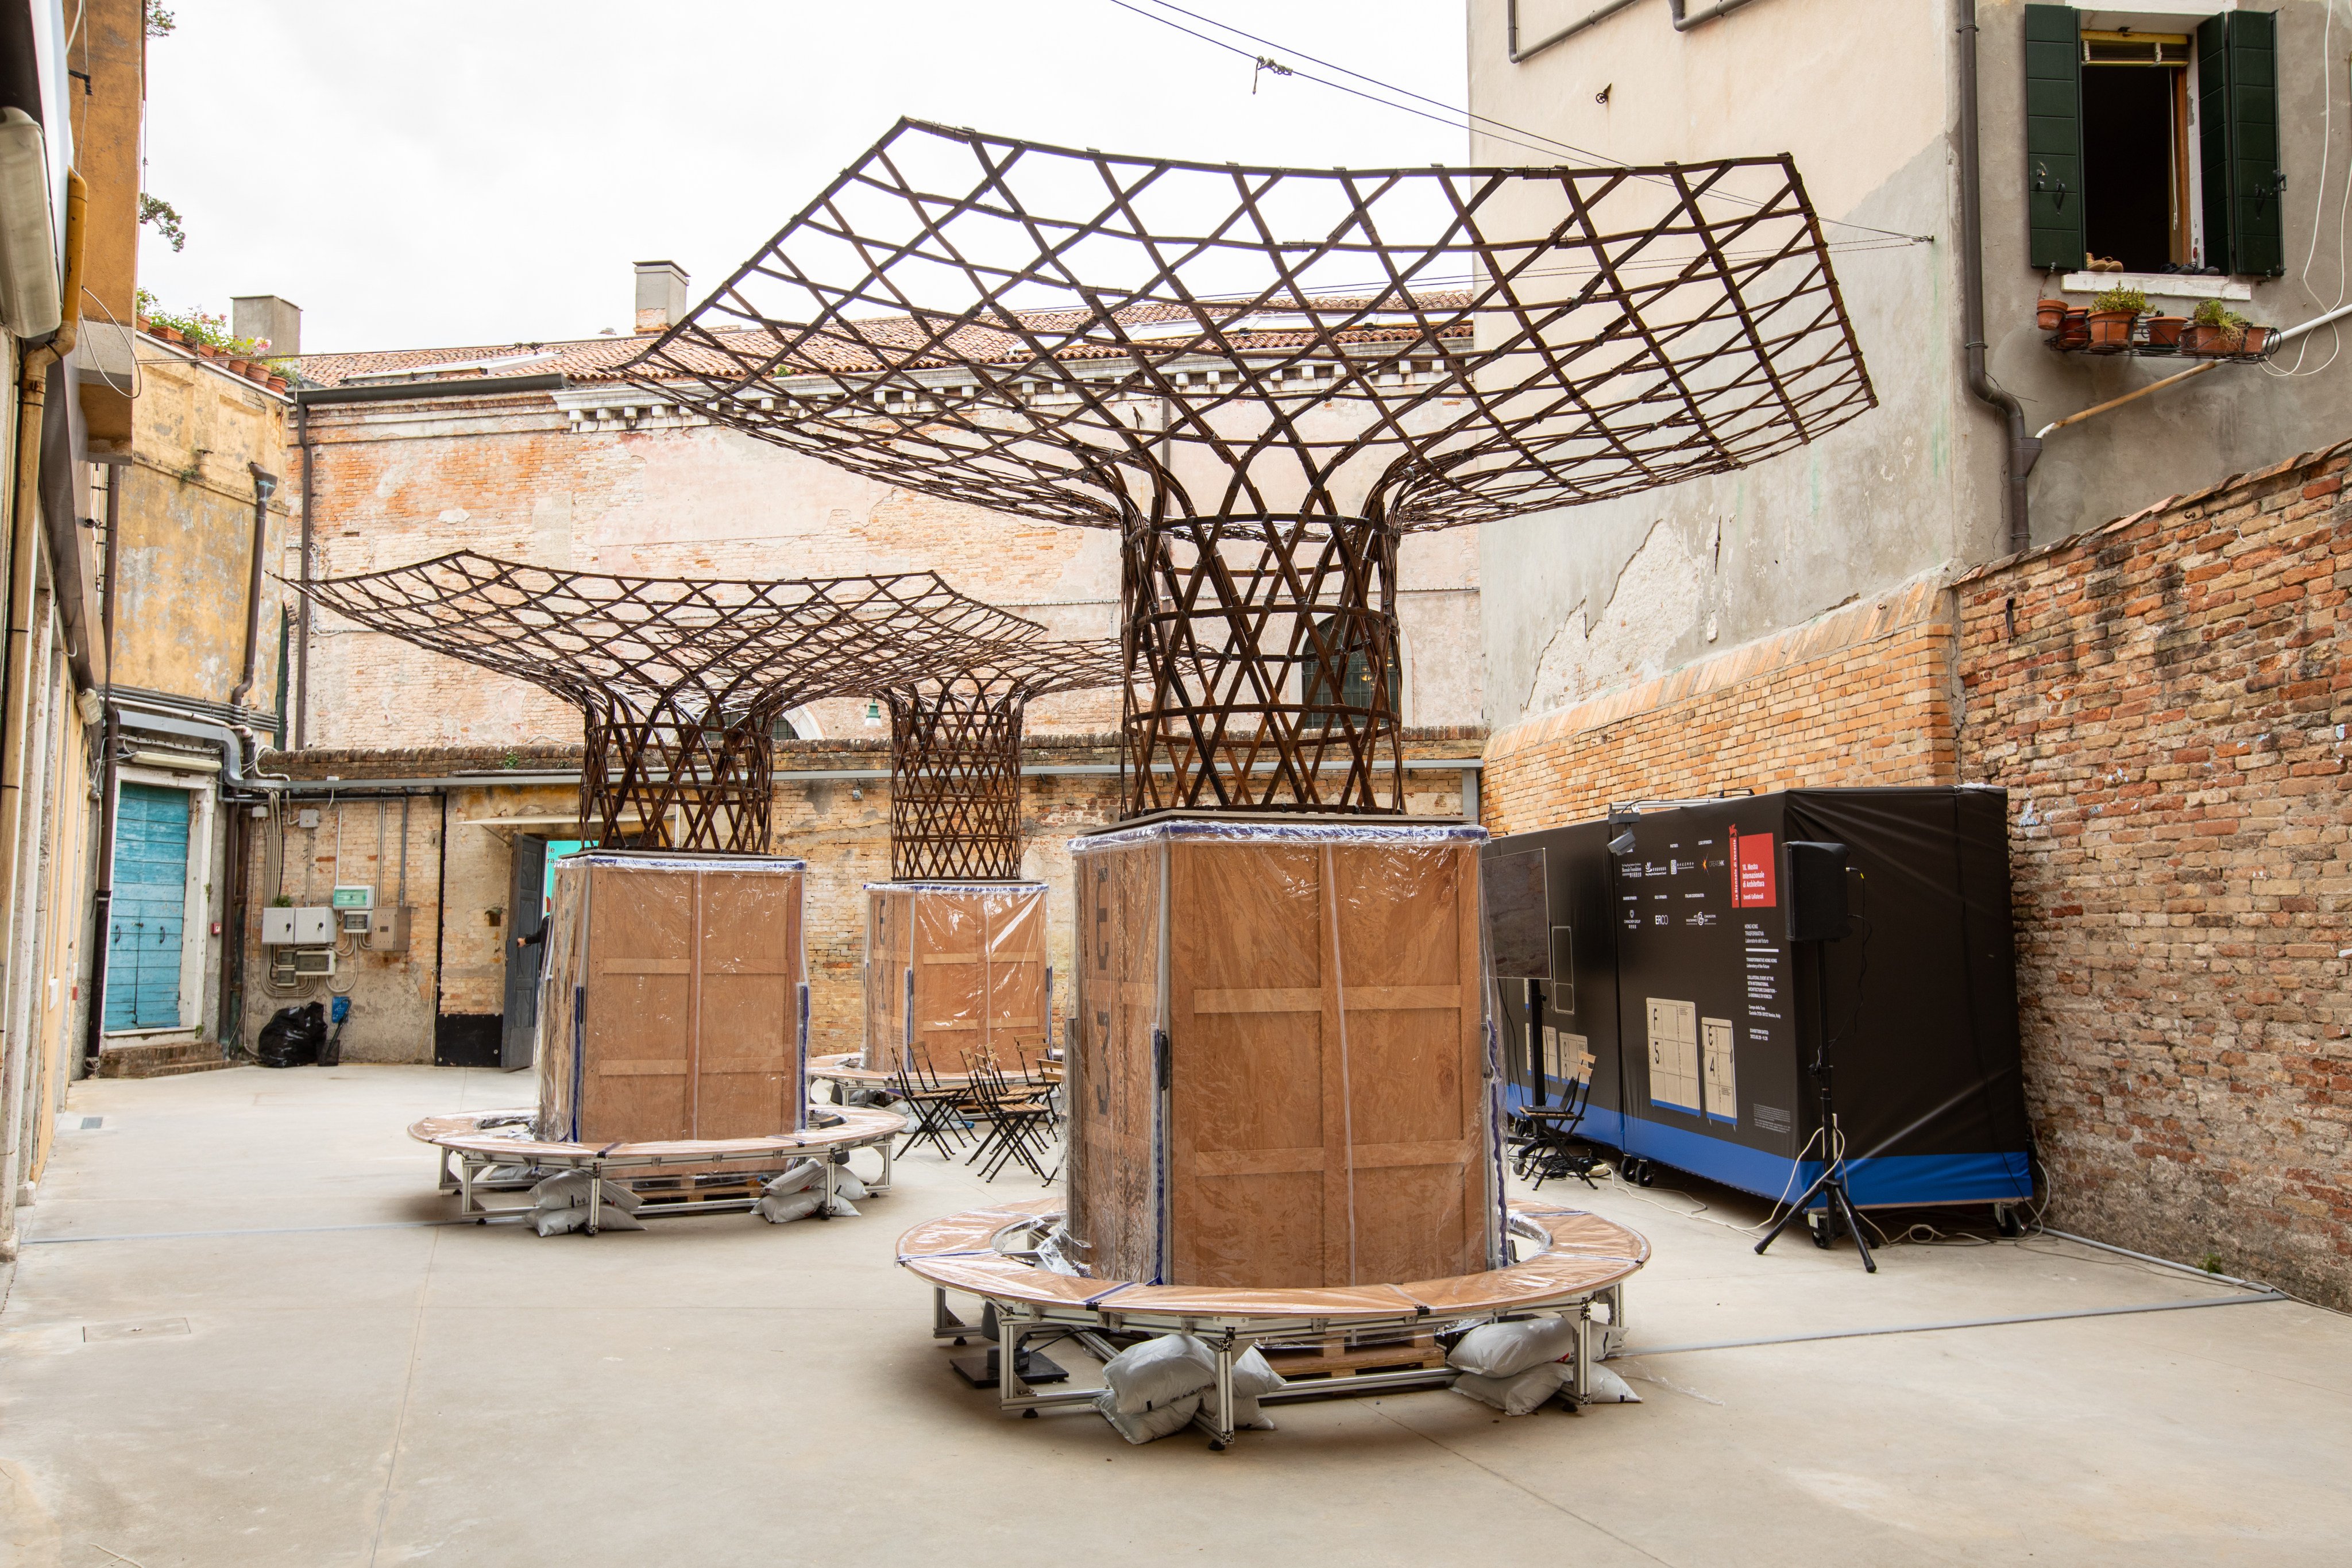 The Hong Kong Pavilion at the 18th Venice Biennale of Architecture greets visitors with bamboo canopies to illustrate the possibilities of sustainable architecture. “Transformative Hong Kong”, Hong Kong’s offering at this year’s event, focuses on using humane design to shape the city’s future. Photo: Michele Agostinis